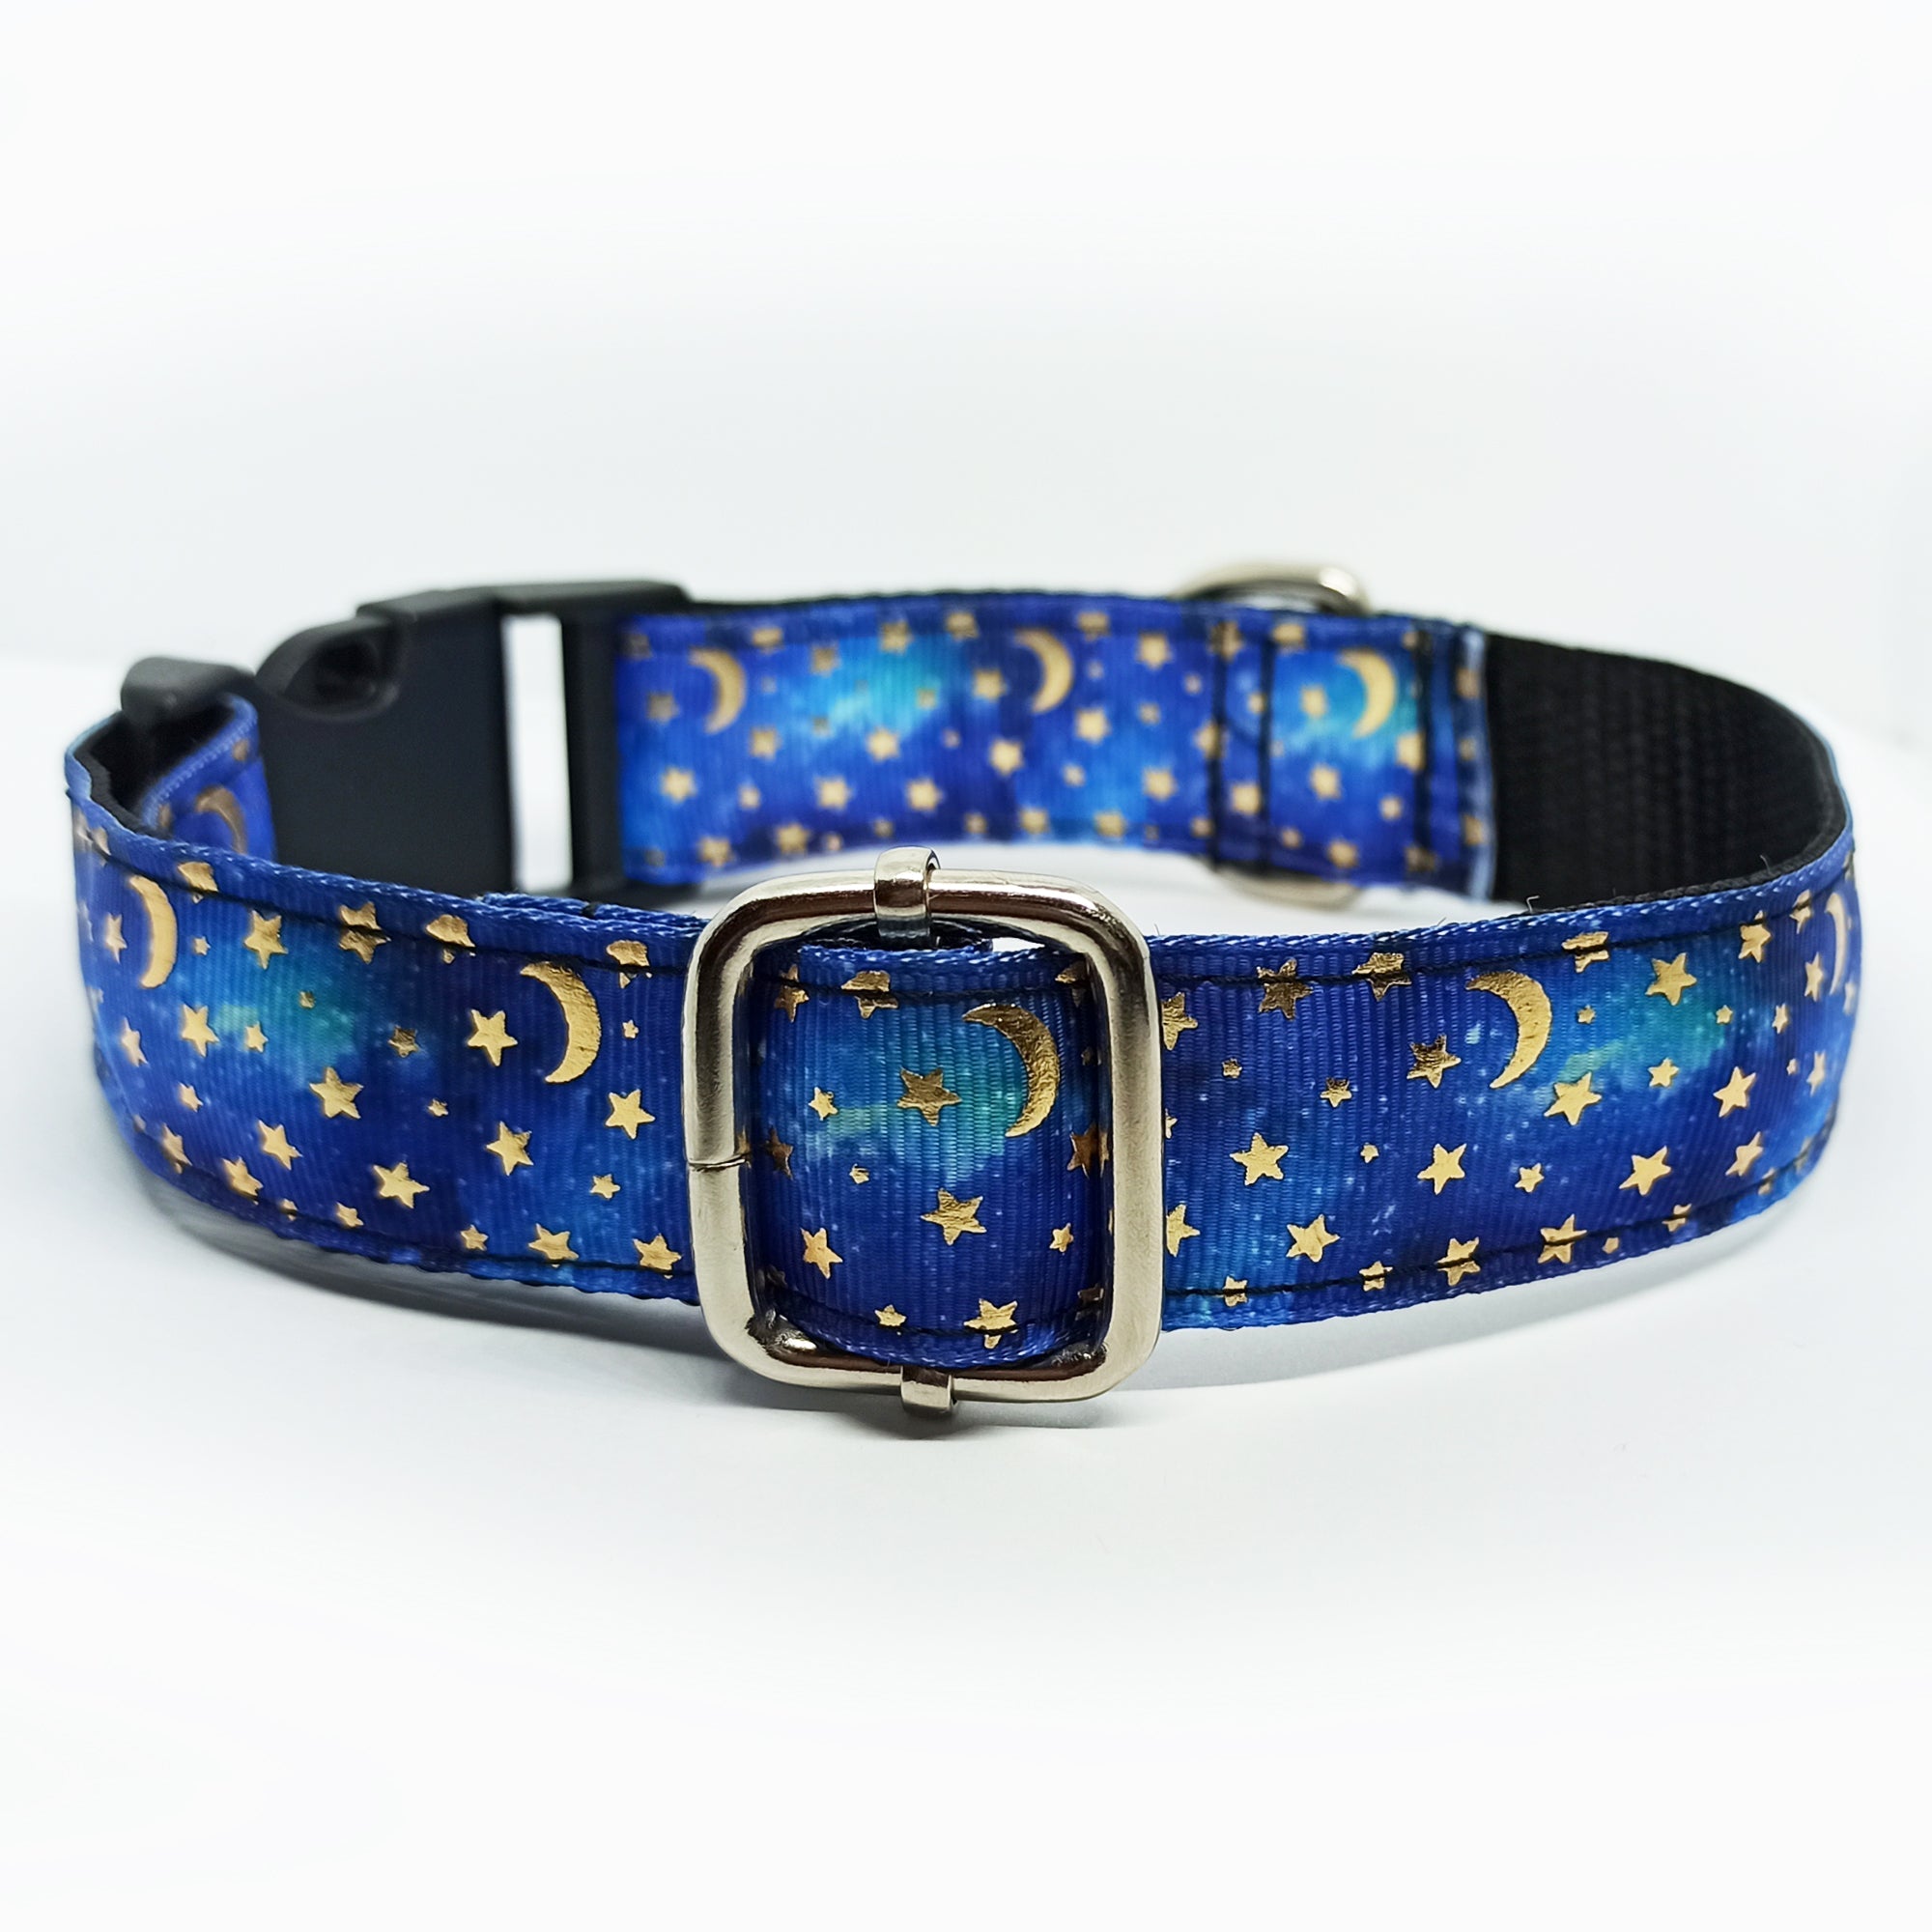 Starry Night Dog Collar - S-L sizes with custom matching pet tag - Adventures of Rubi